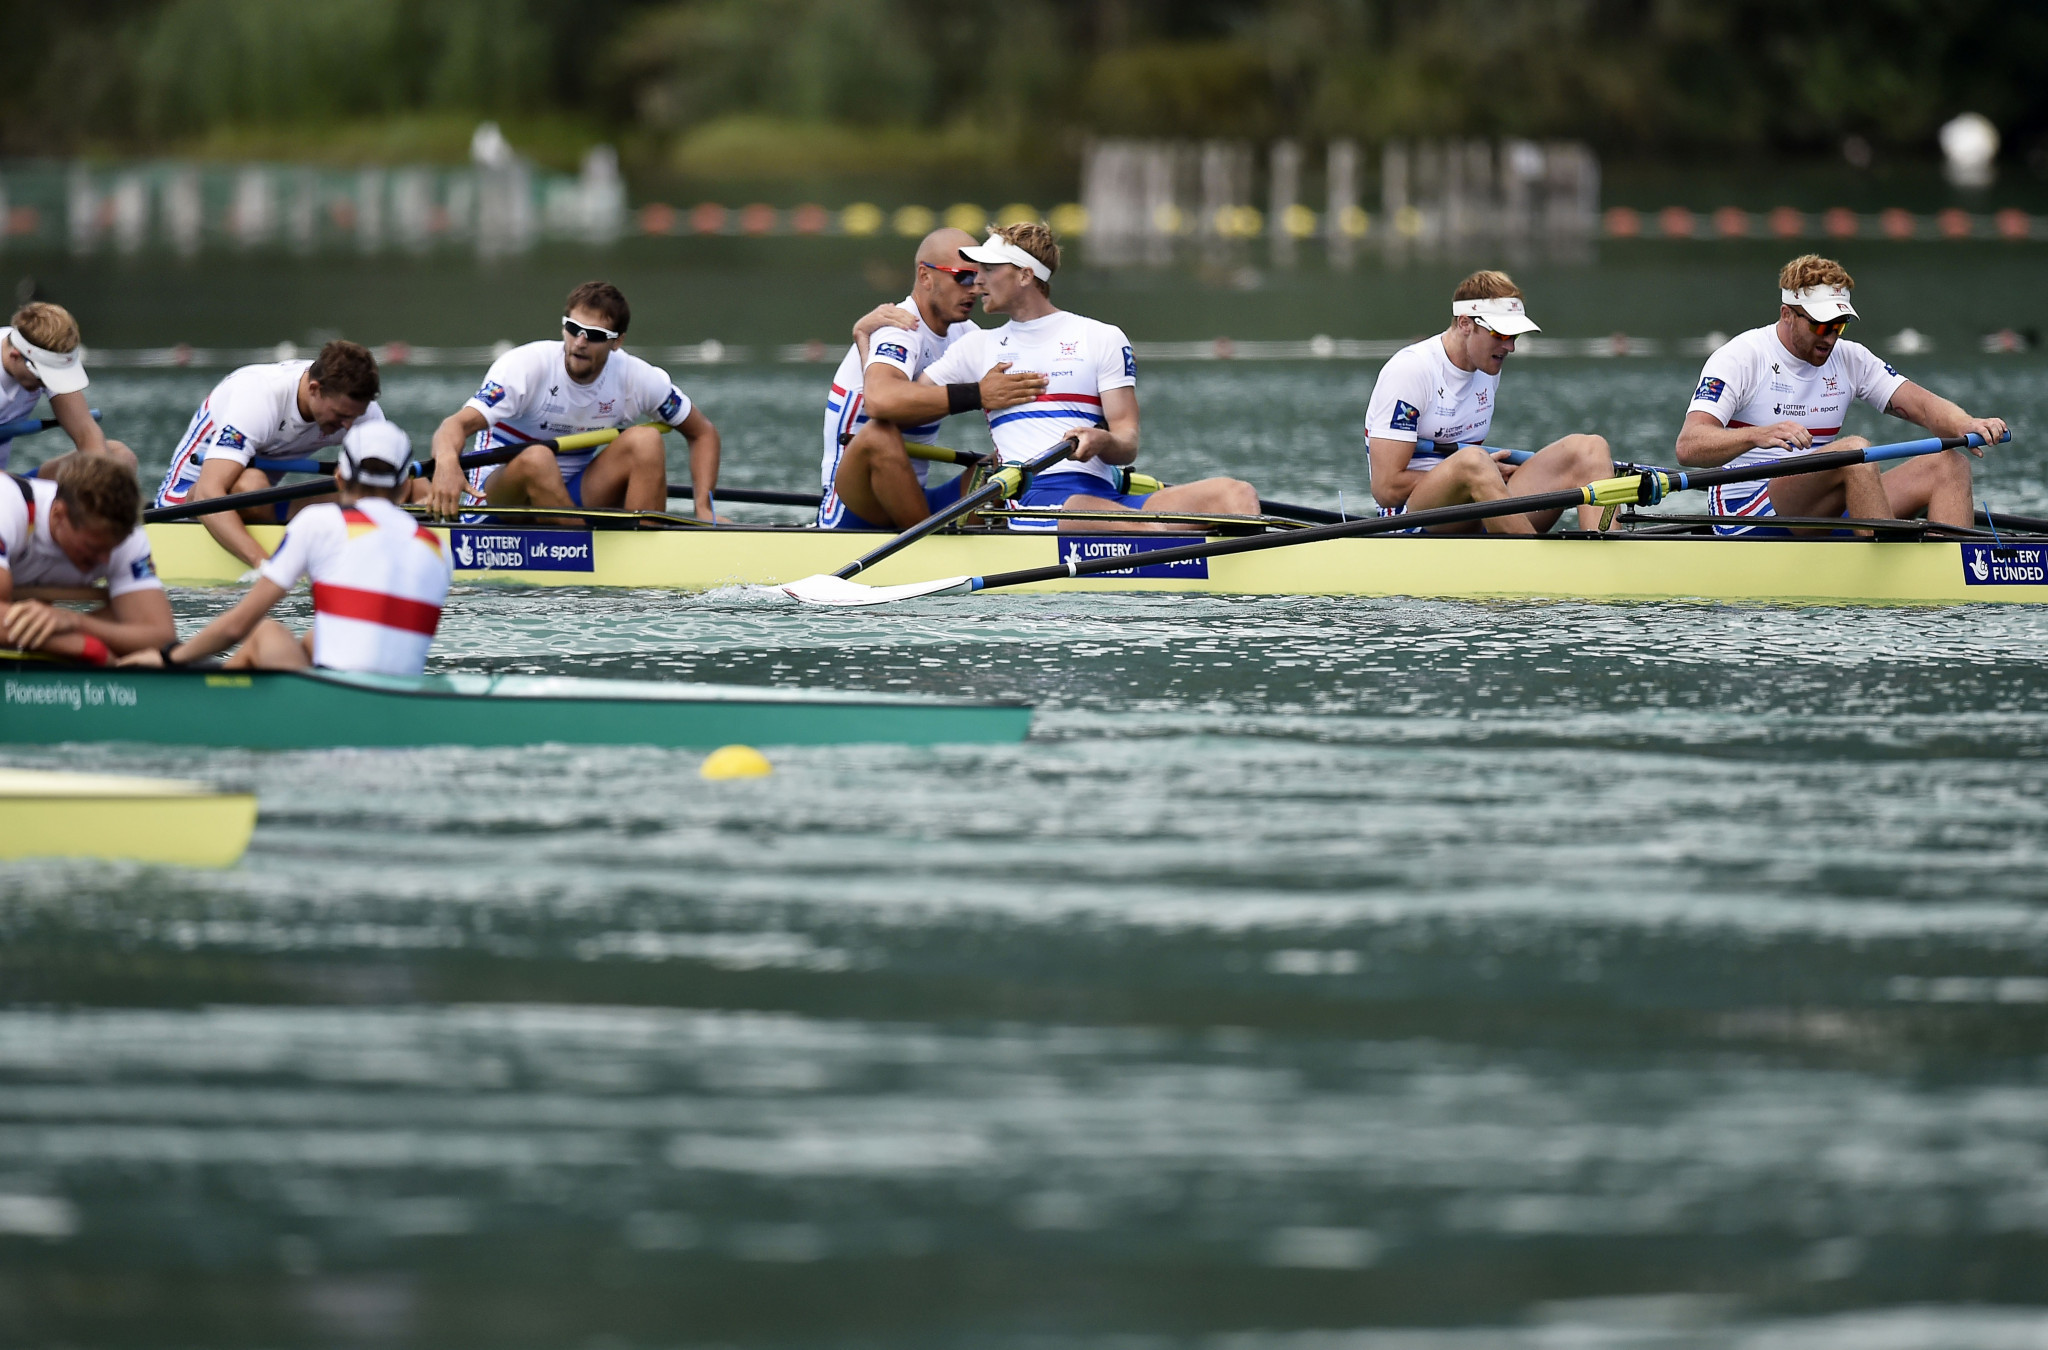 Belgrade, Poznan and Trakai in contention to host 2023 World Rowing